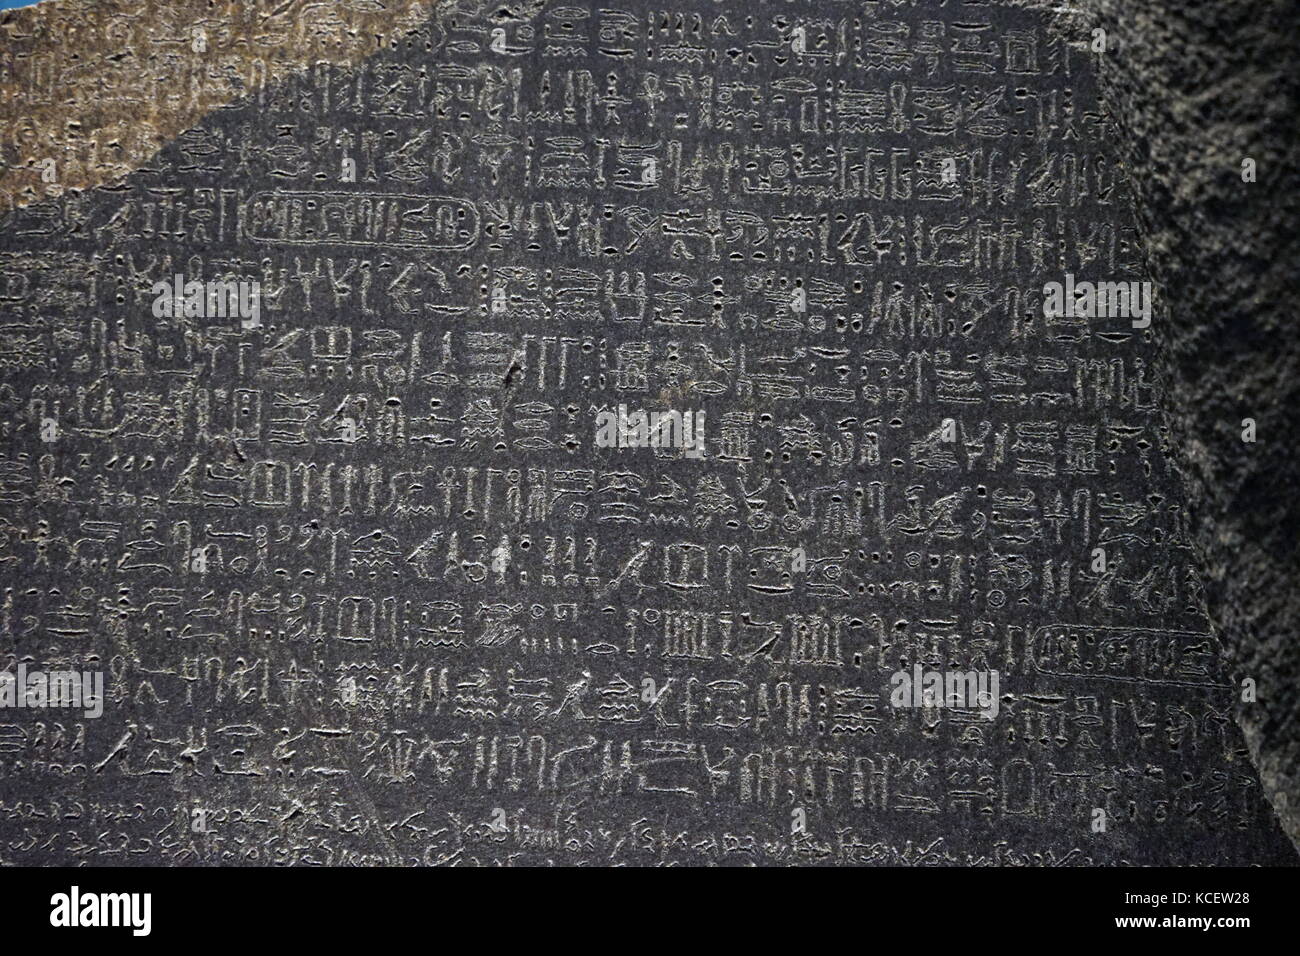 The Rosetta Stone is a rock stele, found in 1799, inscribed with a decree issued at Memphis, Egypt, in 196 BC on behalf of King Ptolemy V. The decree appears in three scripts: the upper text shown here, is Ancient Egyptian hieroglyphs Stock Photo